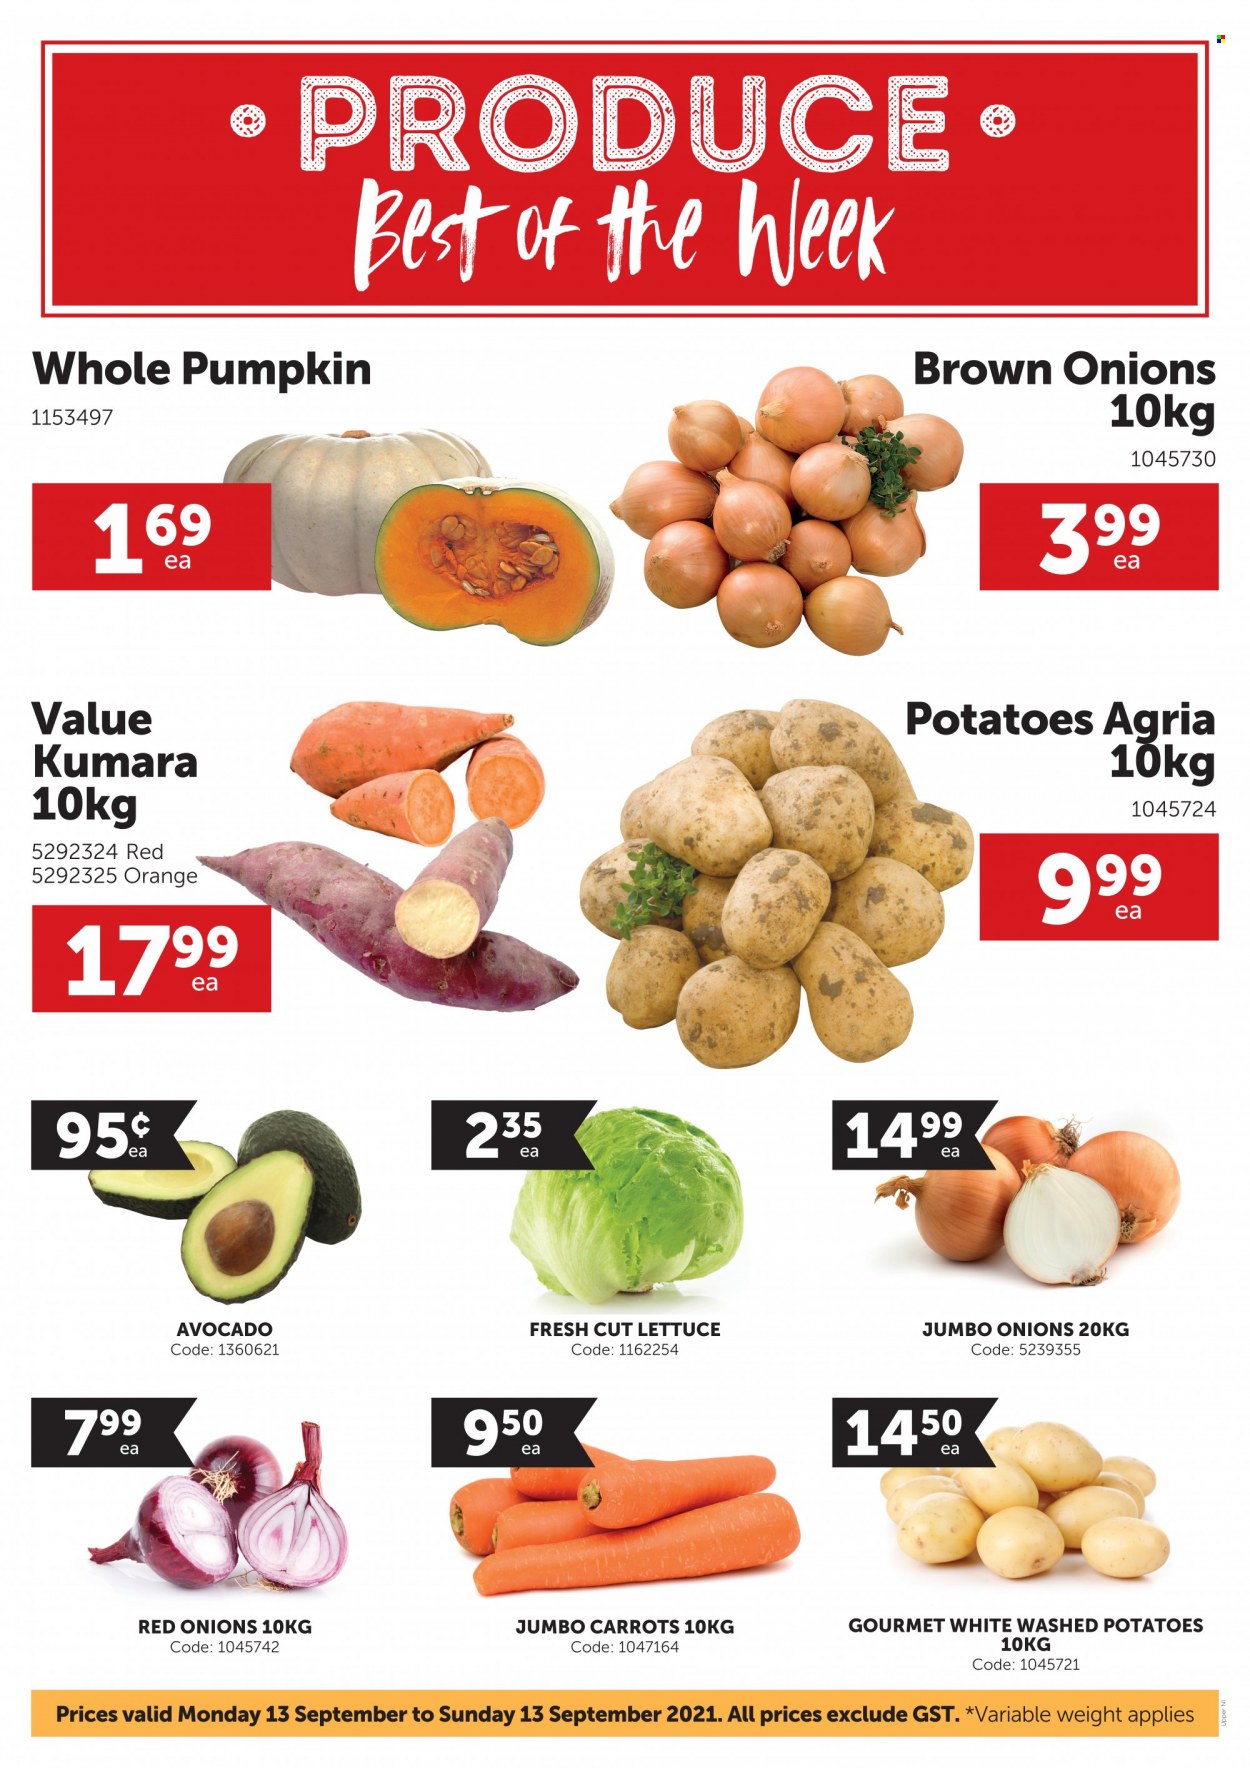 thumbnail - Gilmours mailer - 13.09.2021 - 19.09.2021 - Sales products - carrots, red onions, potatoes, pumpkin, onion, lettuce, avocado, oranges. Page 1.